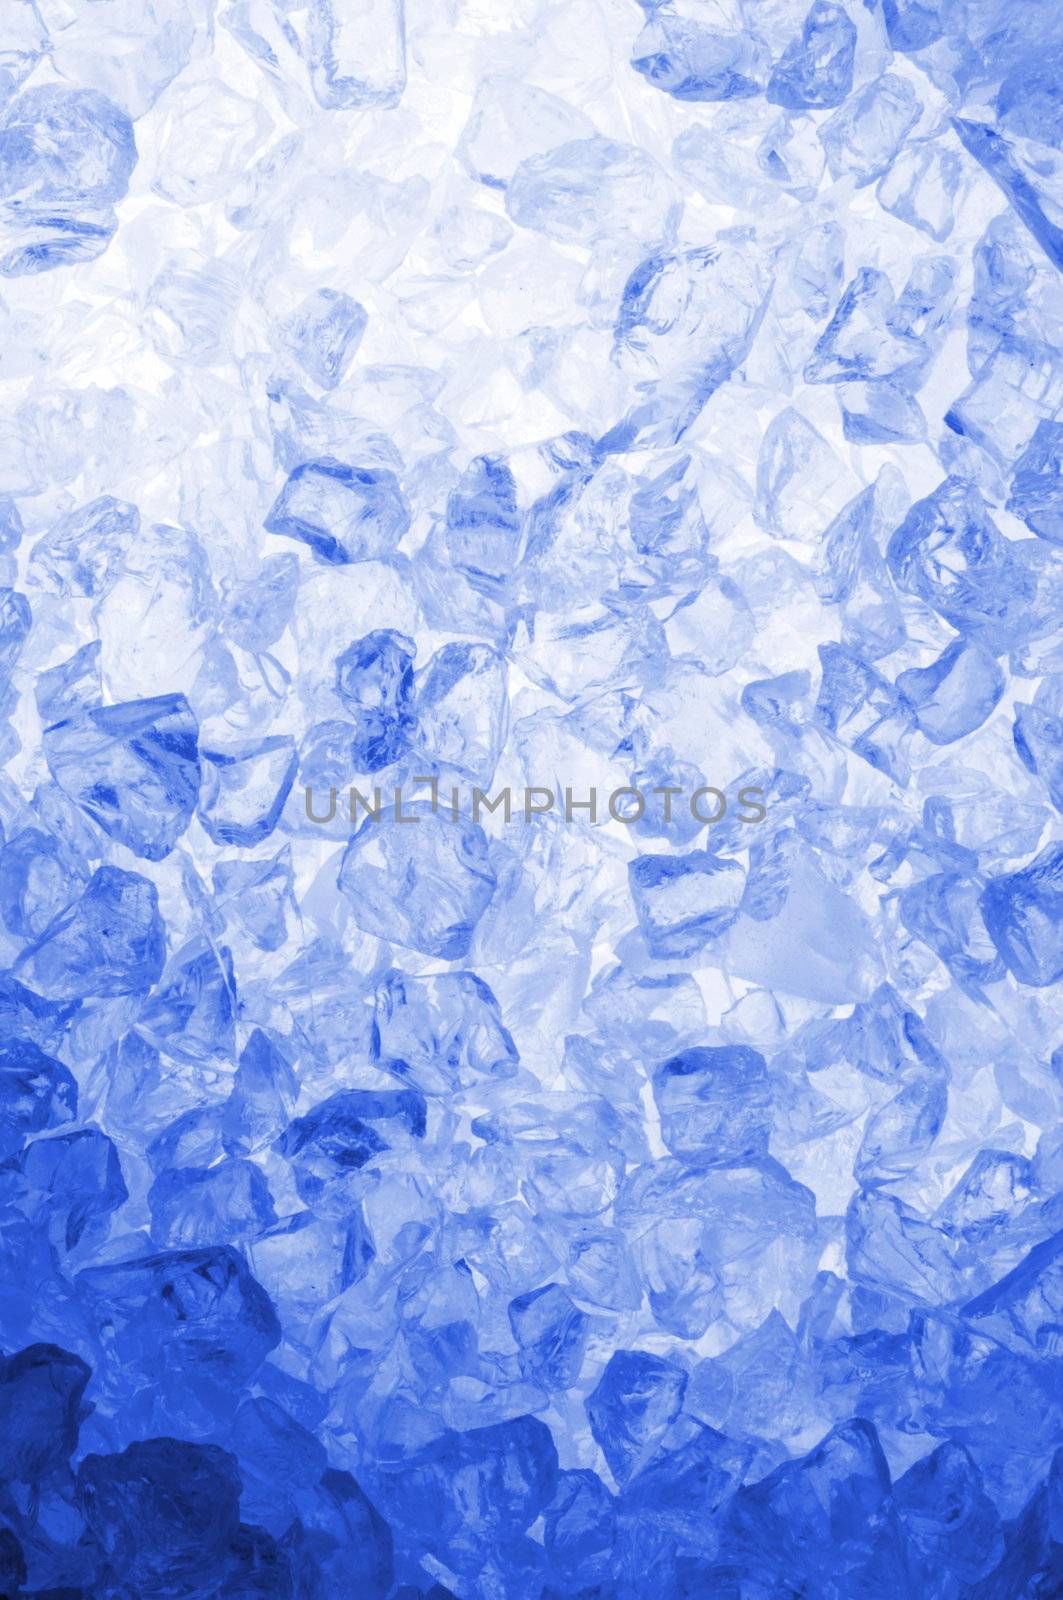 abstract blie ice background by gunnar3000